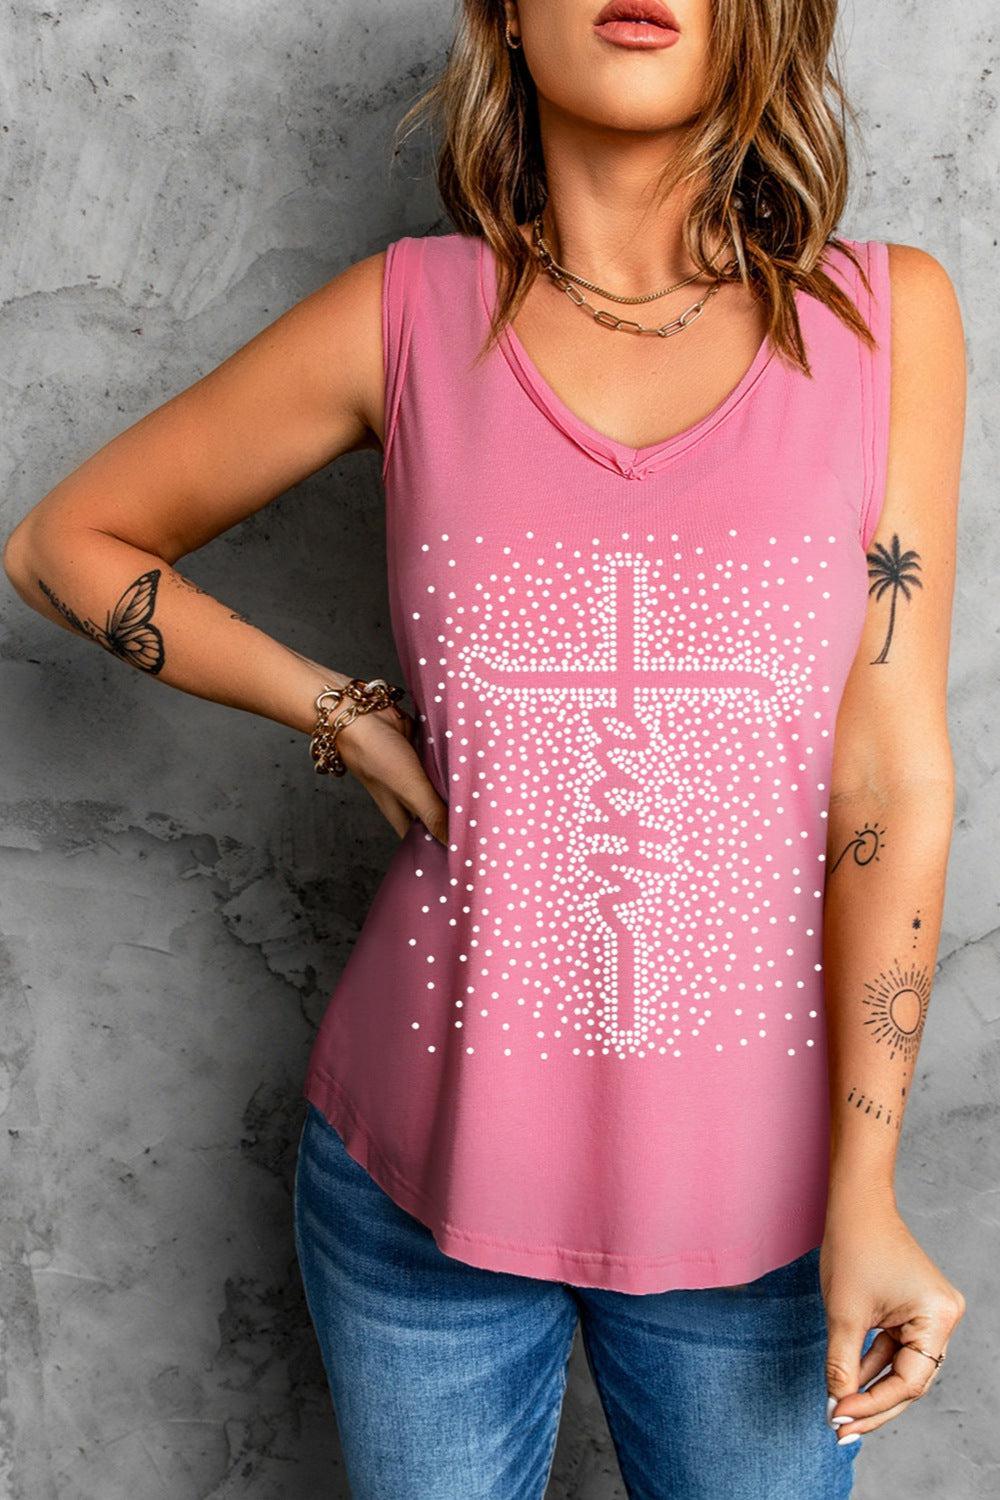 a woman wearing a pink tank top with a cross on it